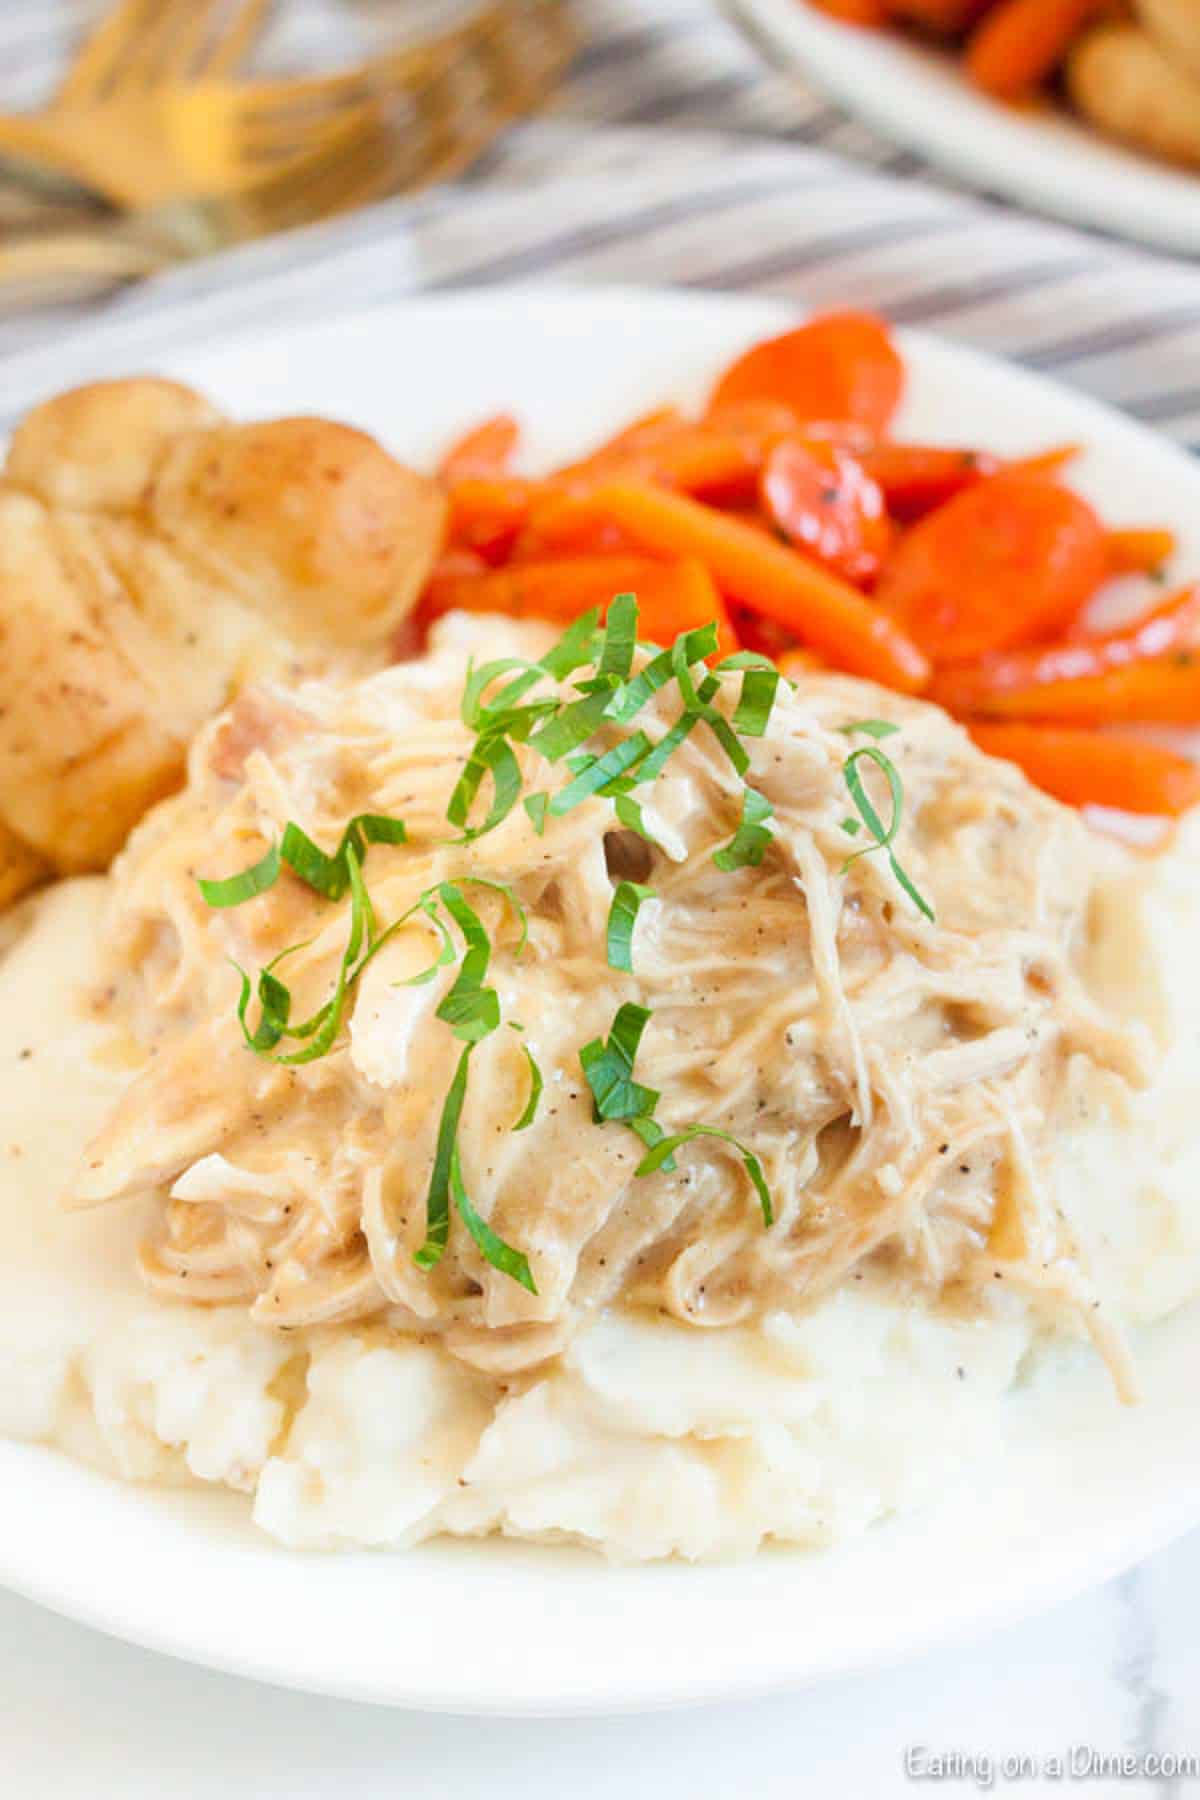 Chicken and gravy over mashed potatoes on a plate with carrots